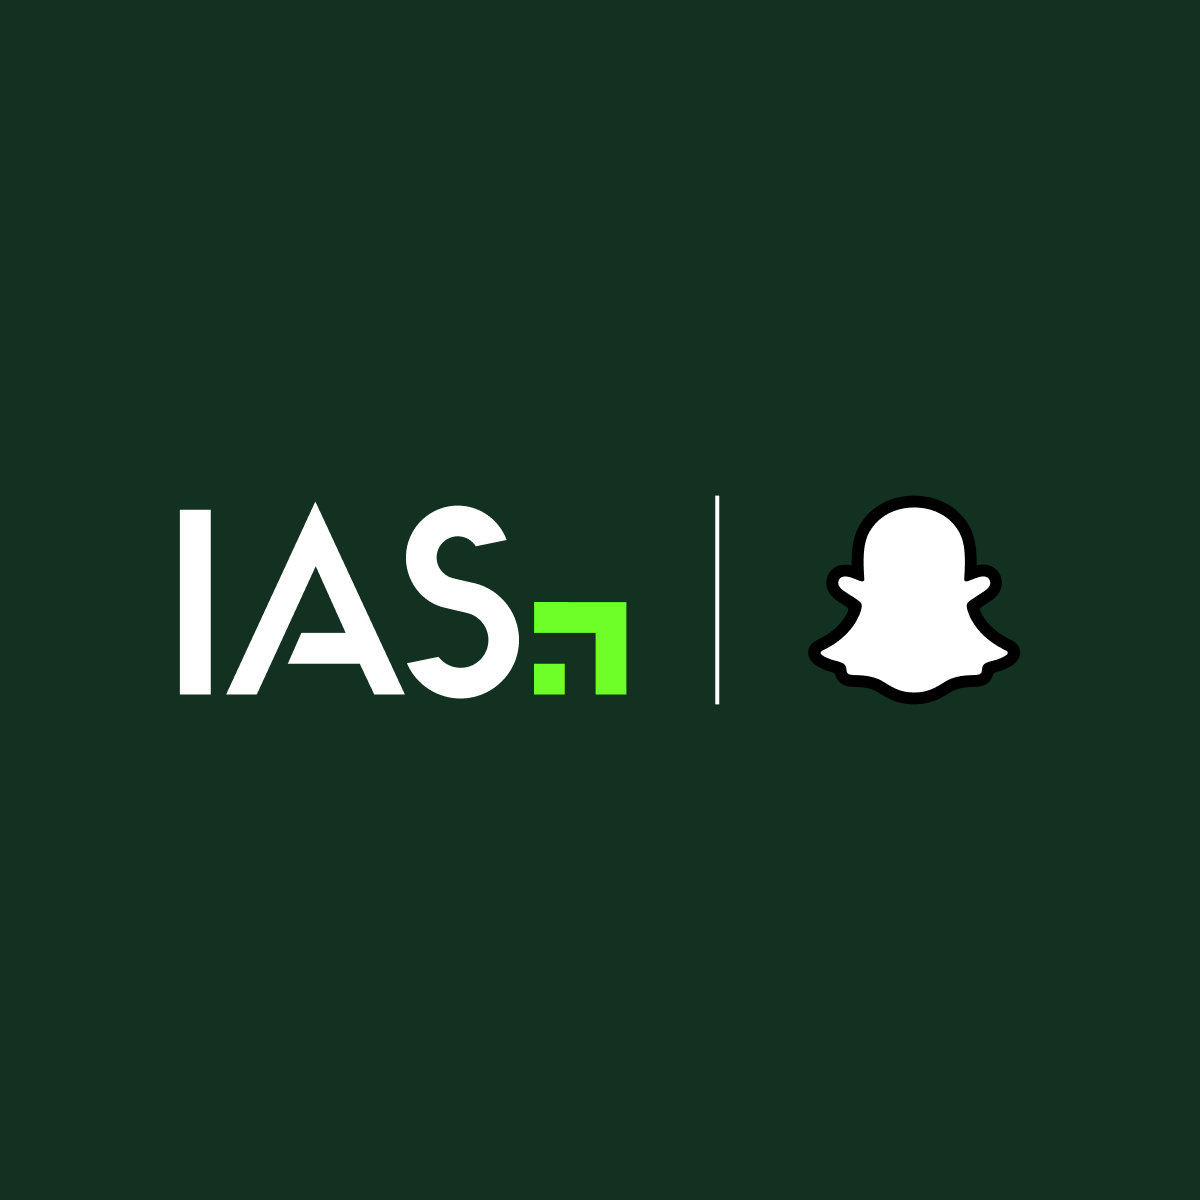 IAS ANNOUNCES FIRST-TO-MARKET PARTNERSHIP WITH SNAP TO PROVIDE AI-DRIVEN BRAND SAFETY AND SUITABILITY MEASUREMENT FOR ADVERTISERS